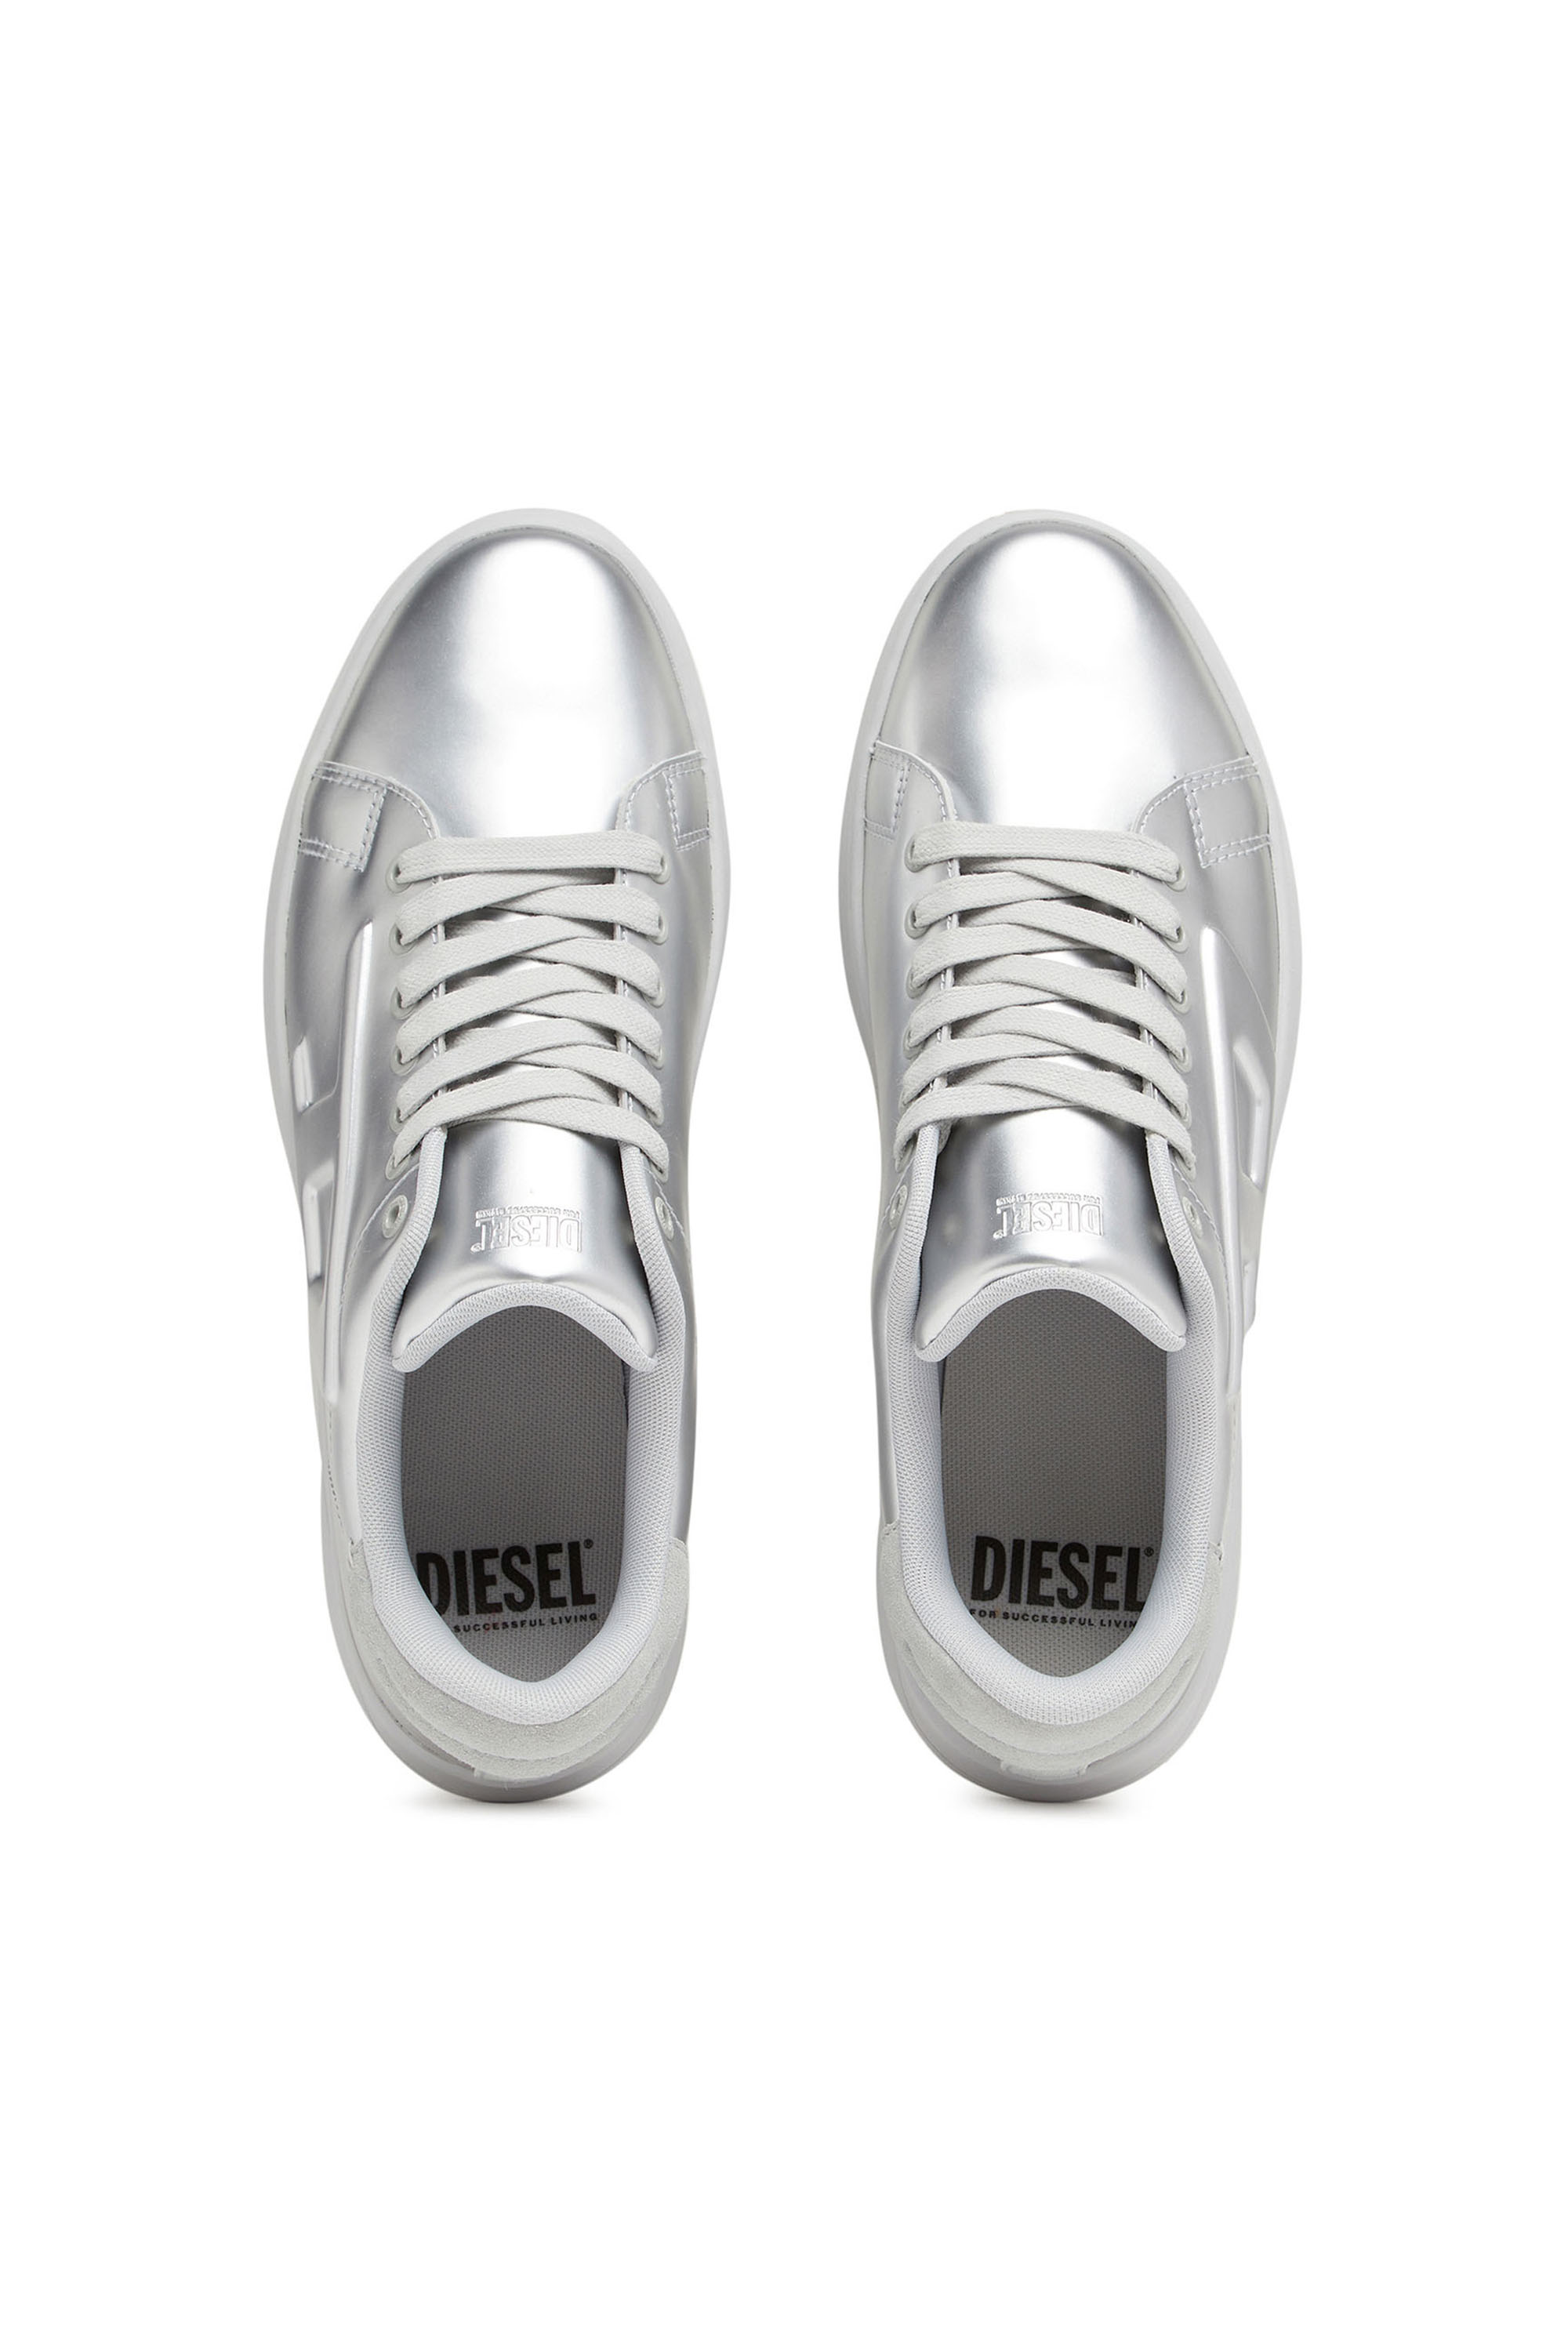 Diesel - S-ATHENE LOW, Silver - Image 5